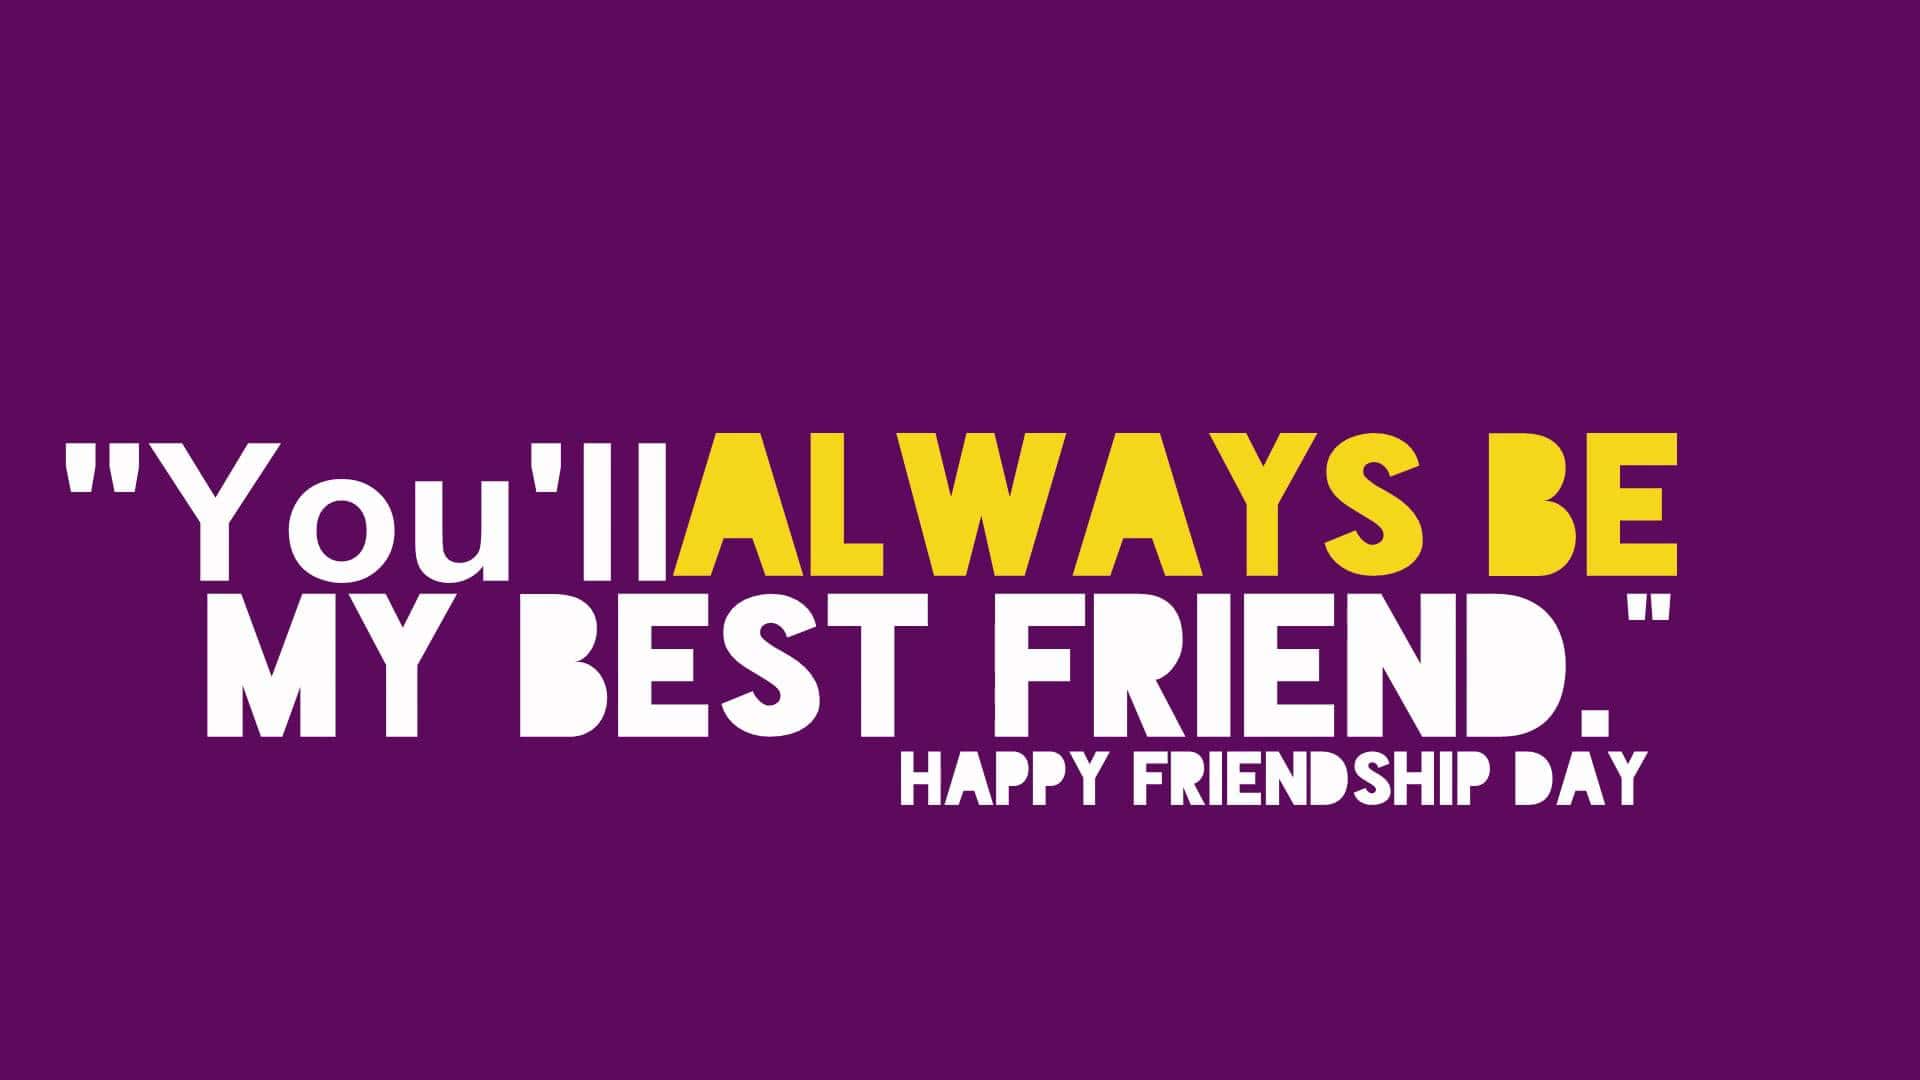 Happy Friendship Day Image, Friendship Day 2019 Picture HD Photo